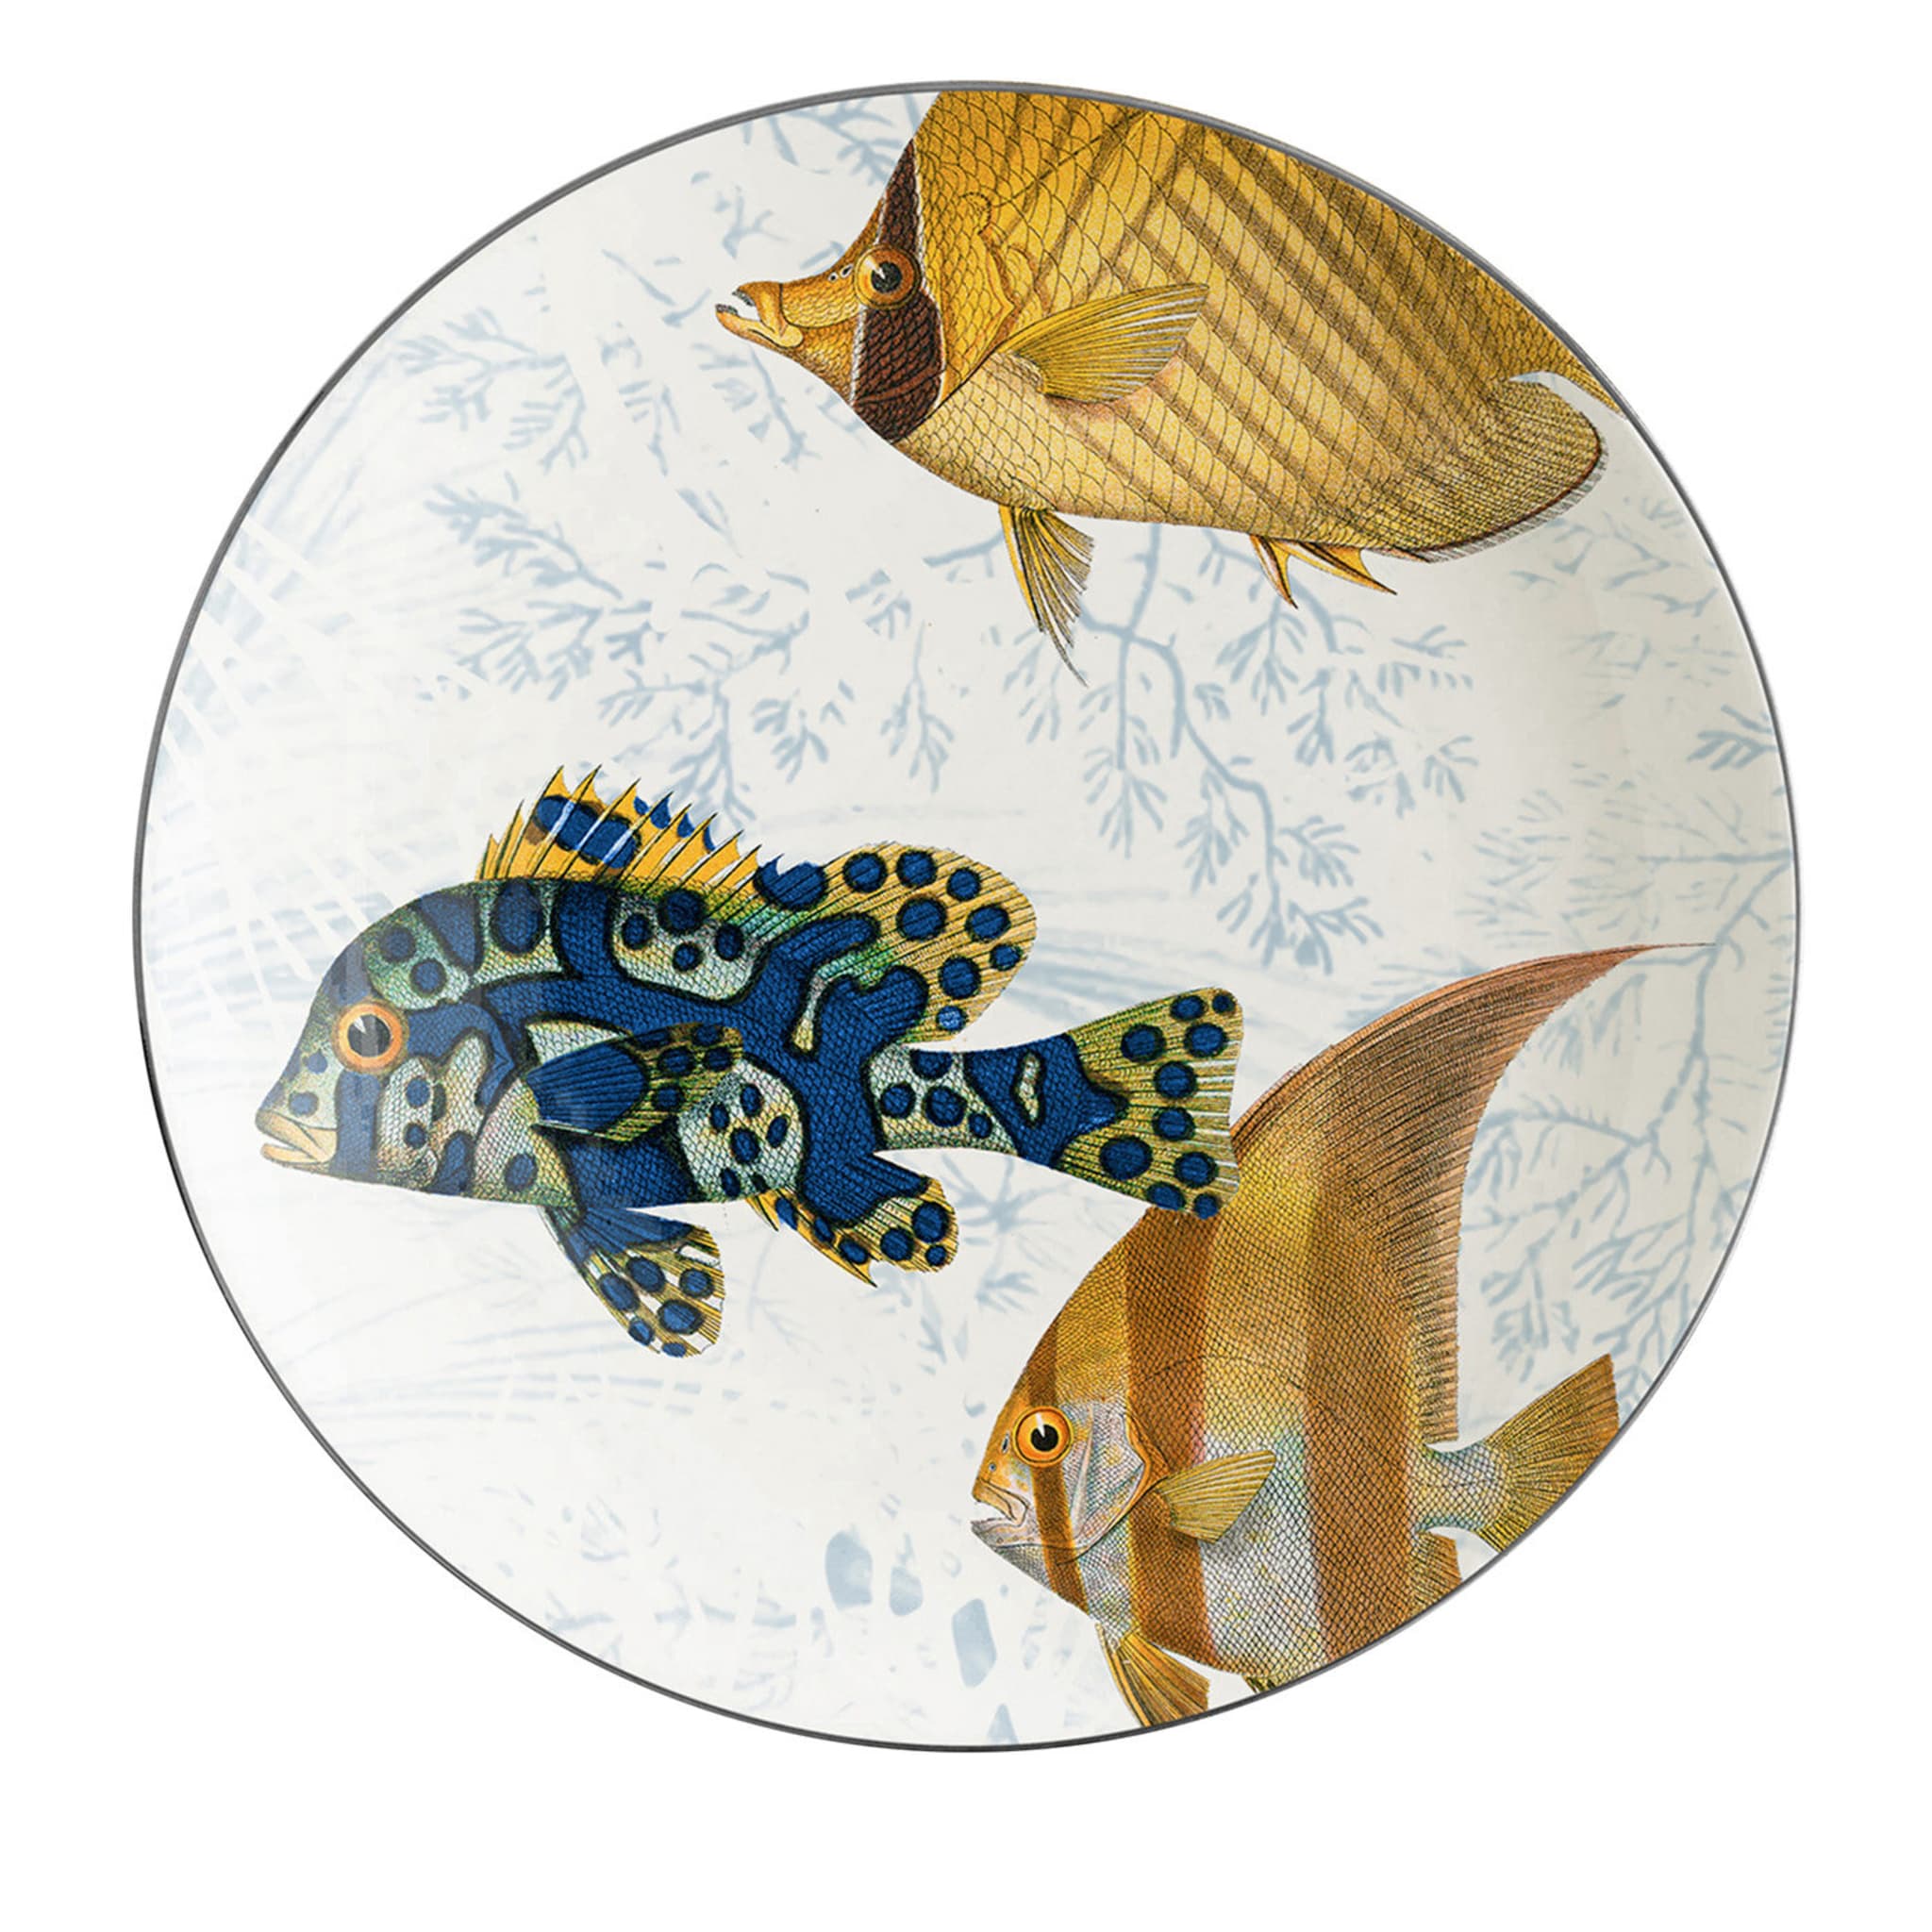 Amami Islands Set of 2 Bread Plates #2 - Main view